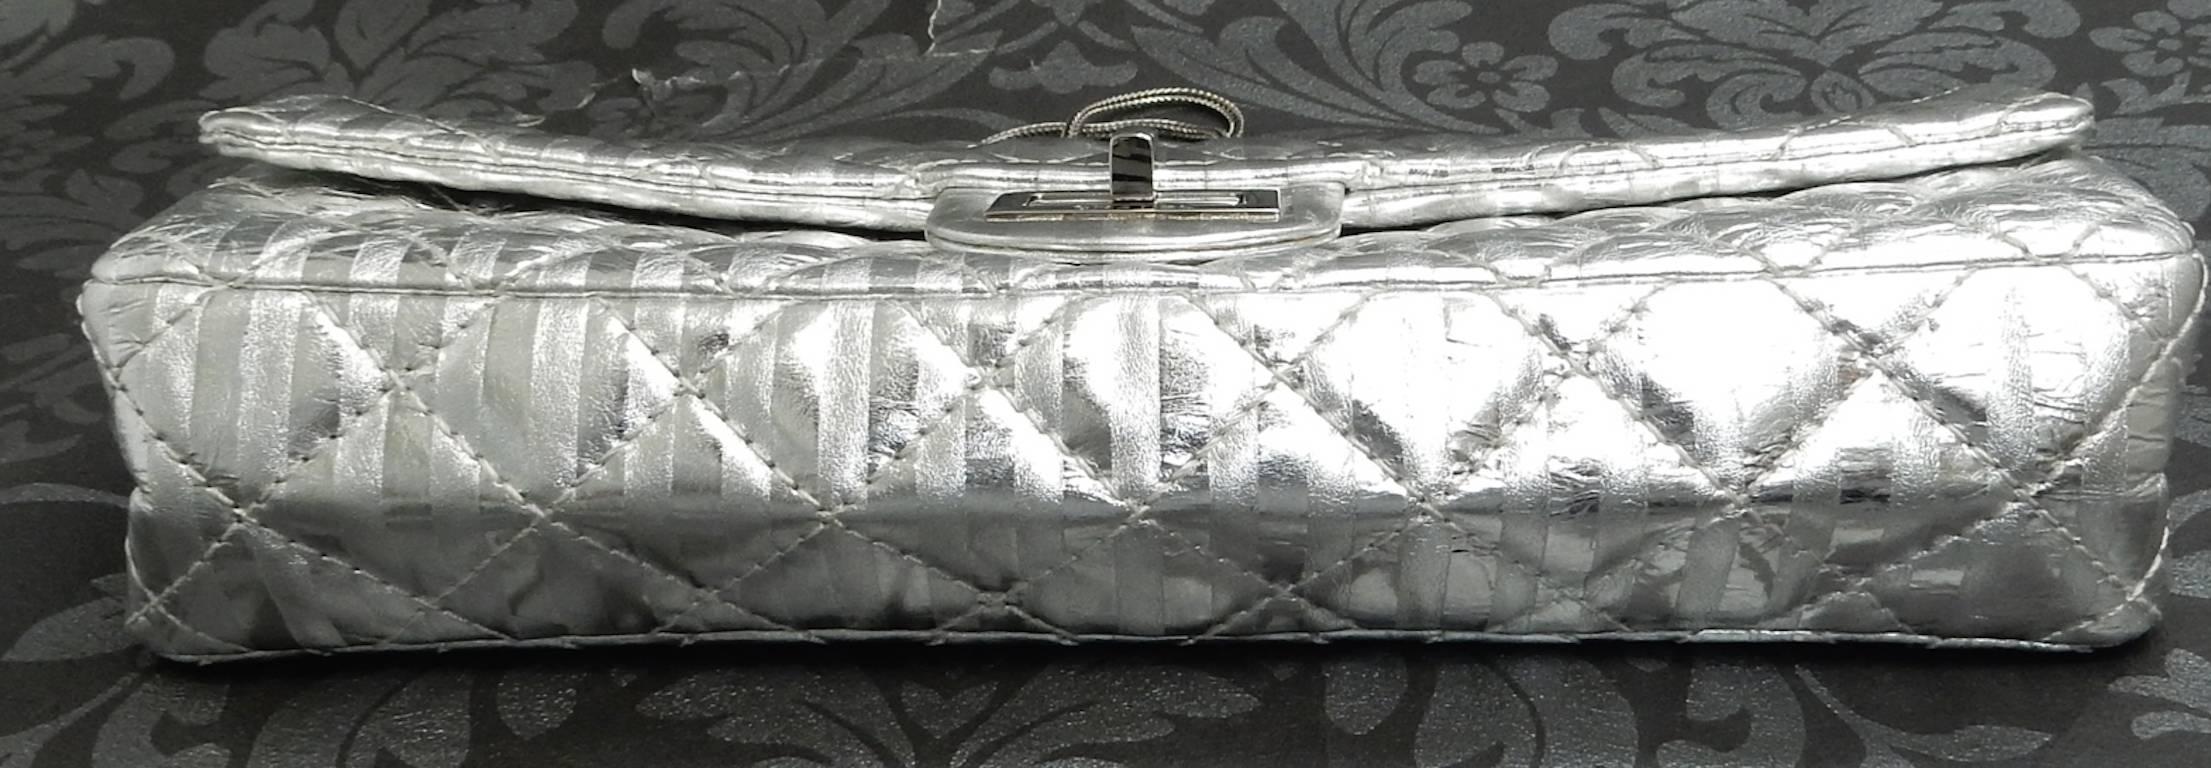 Women's Chanel Silver Metallic Quilted Calf Skin Leather Flap Reissue Shoulder Bag